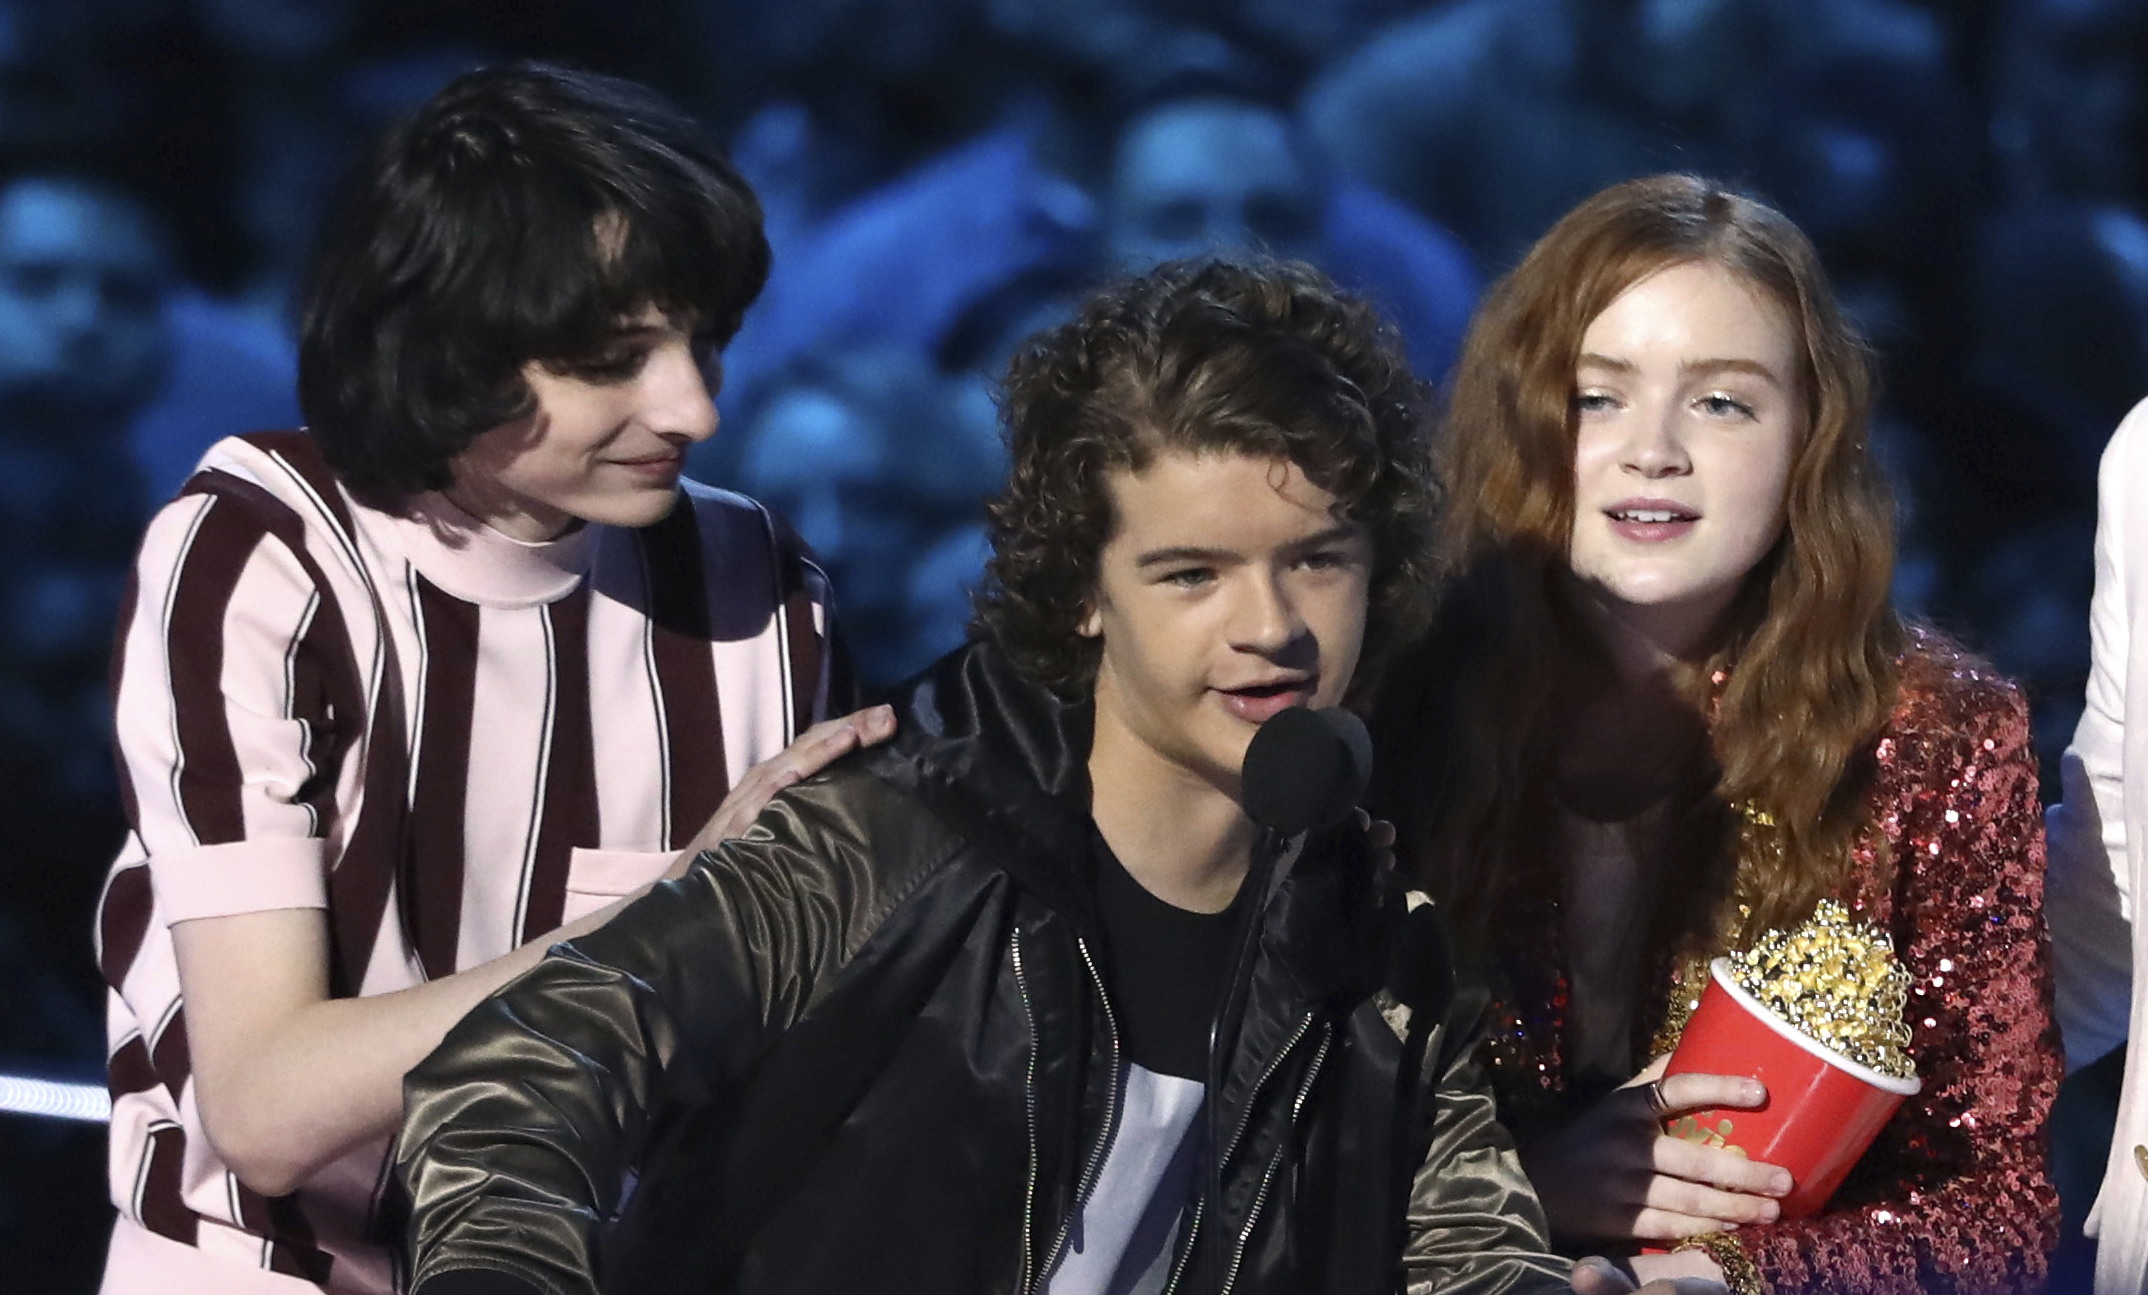 In this Saturday, June 16, 2018, photo, Finn Wolfhard, from left, Gaten Matarazzo and Sadie Sink accept the award for best show for "Stranger Things" at the MTV Movie and TV Awards at the Barker Hangar in Santa Monica, Calif.